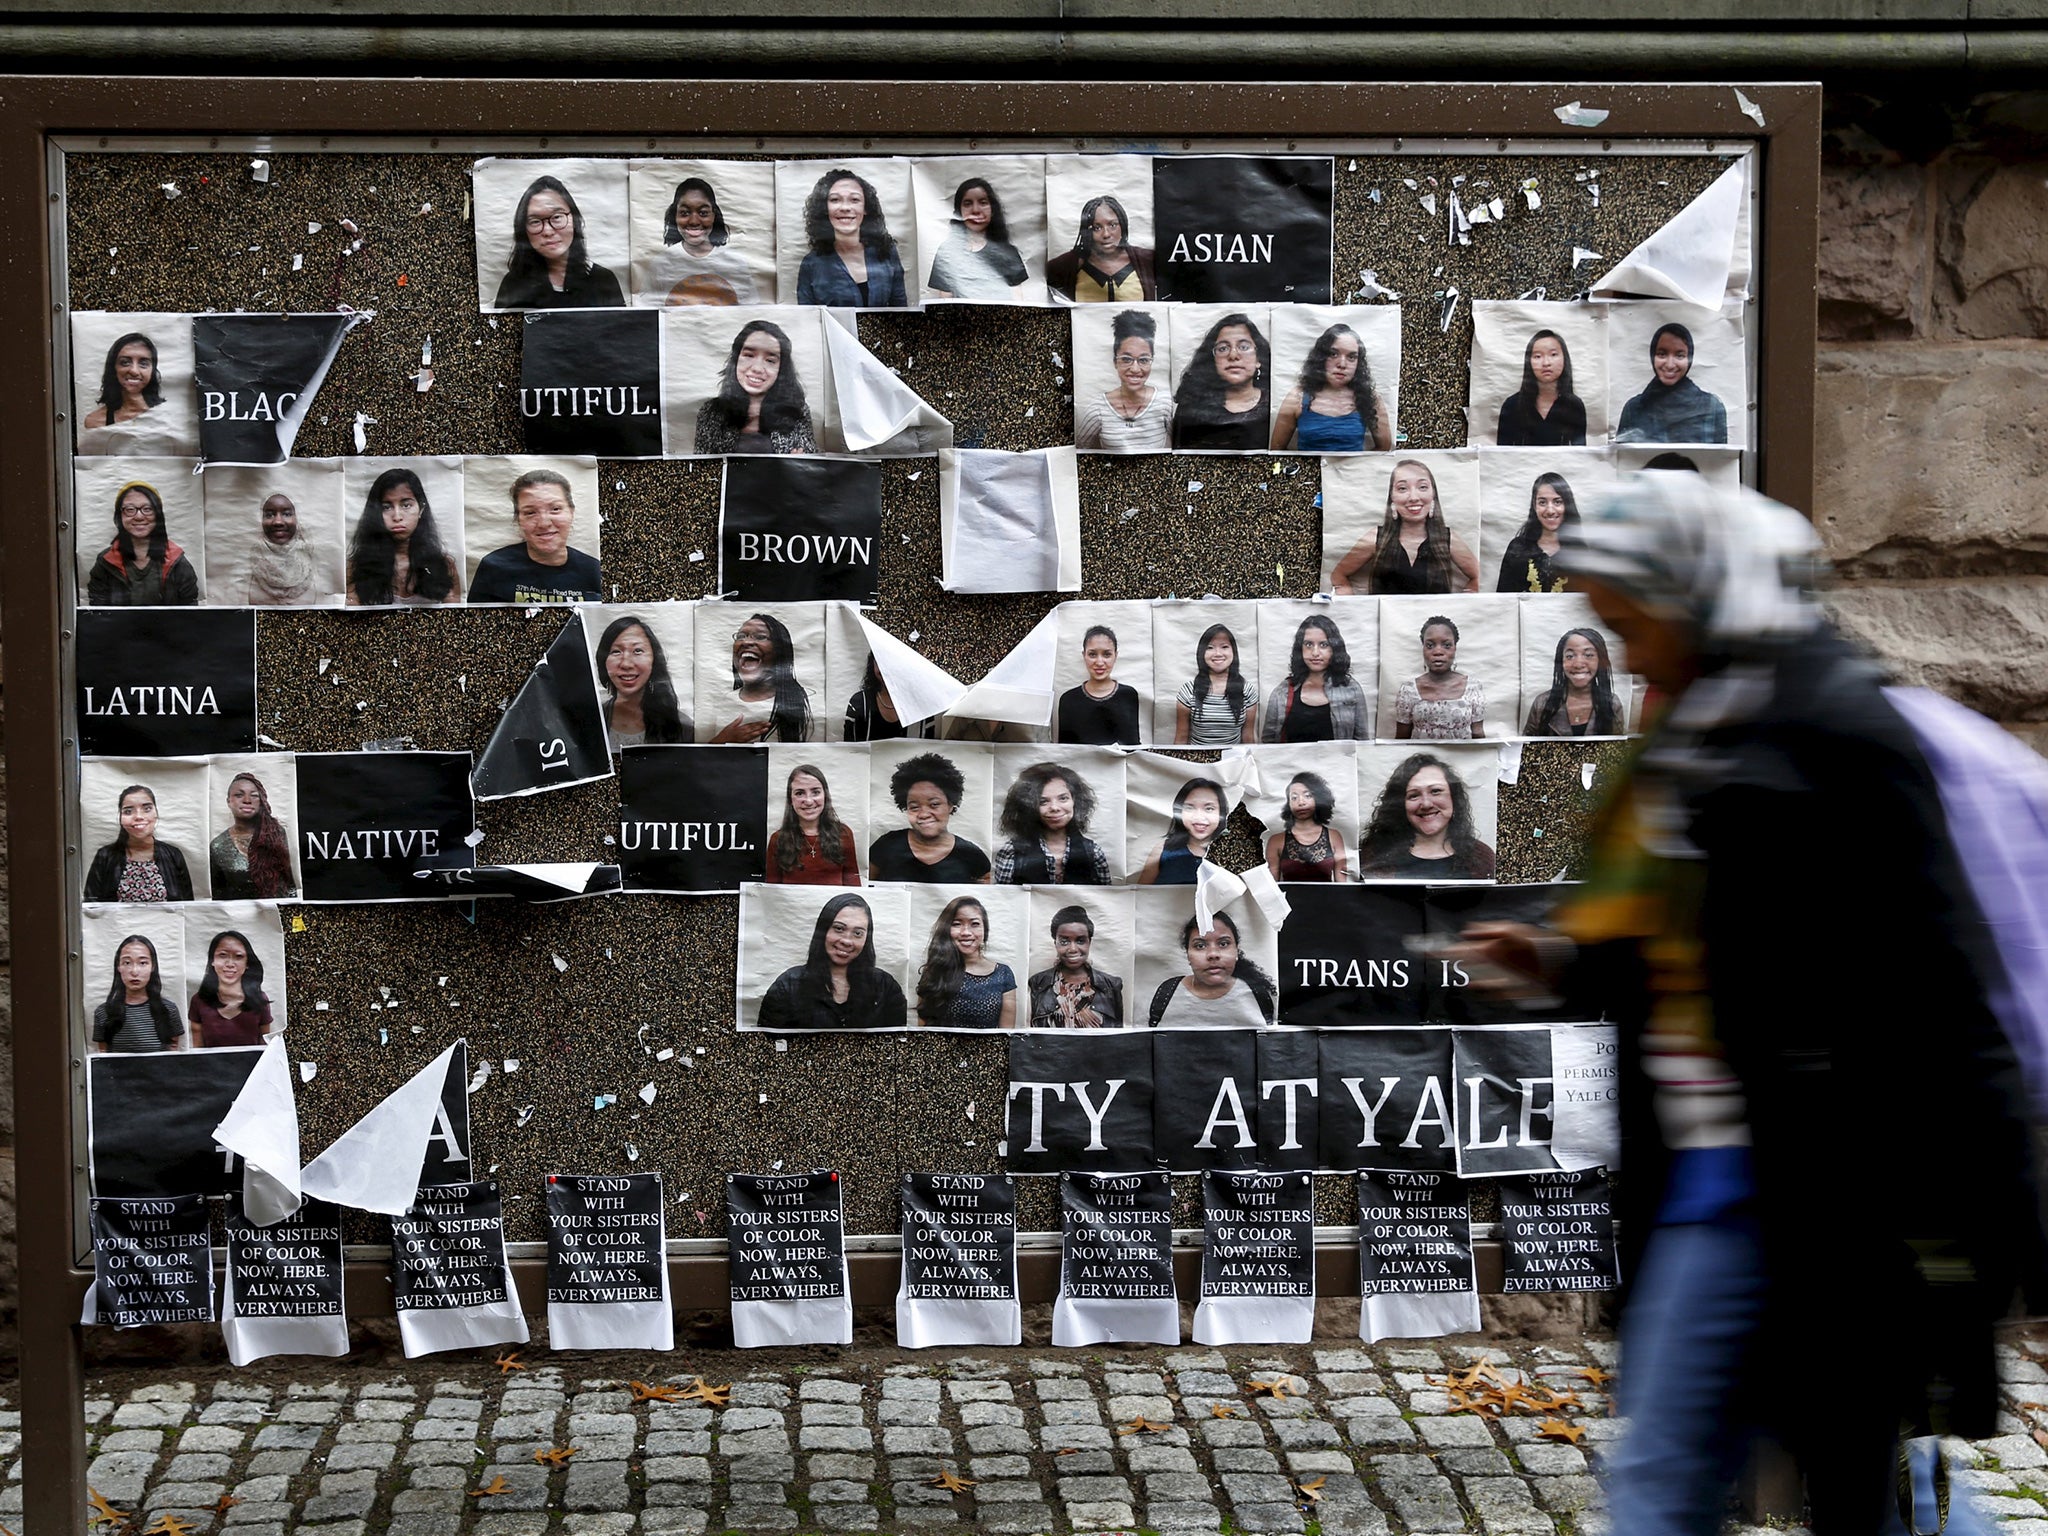 A college noticeboard at Yale University in New Haven, Connecticut, this week, where students protested against an email judged to be insensitive